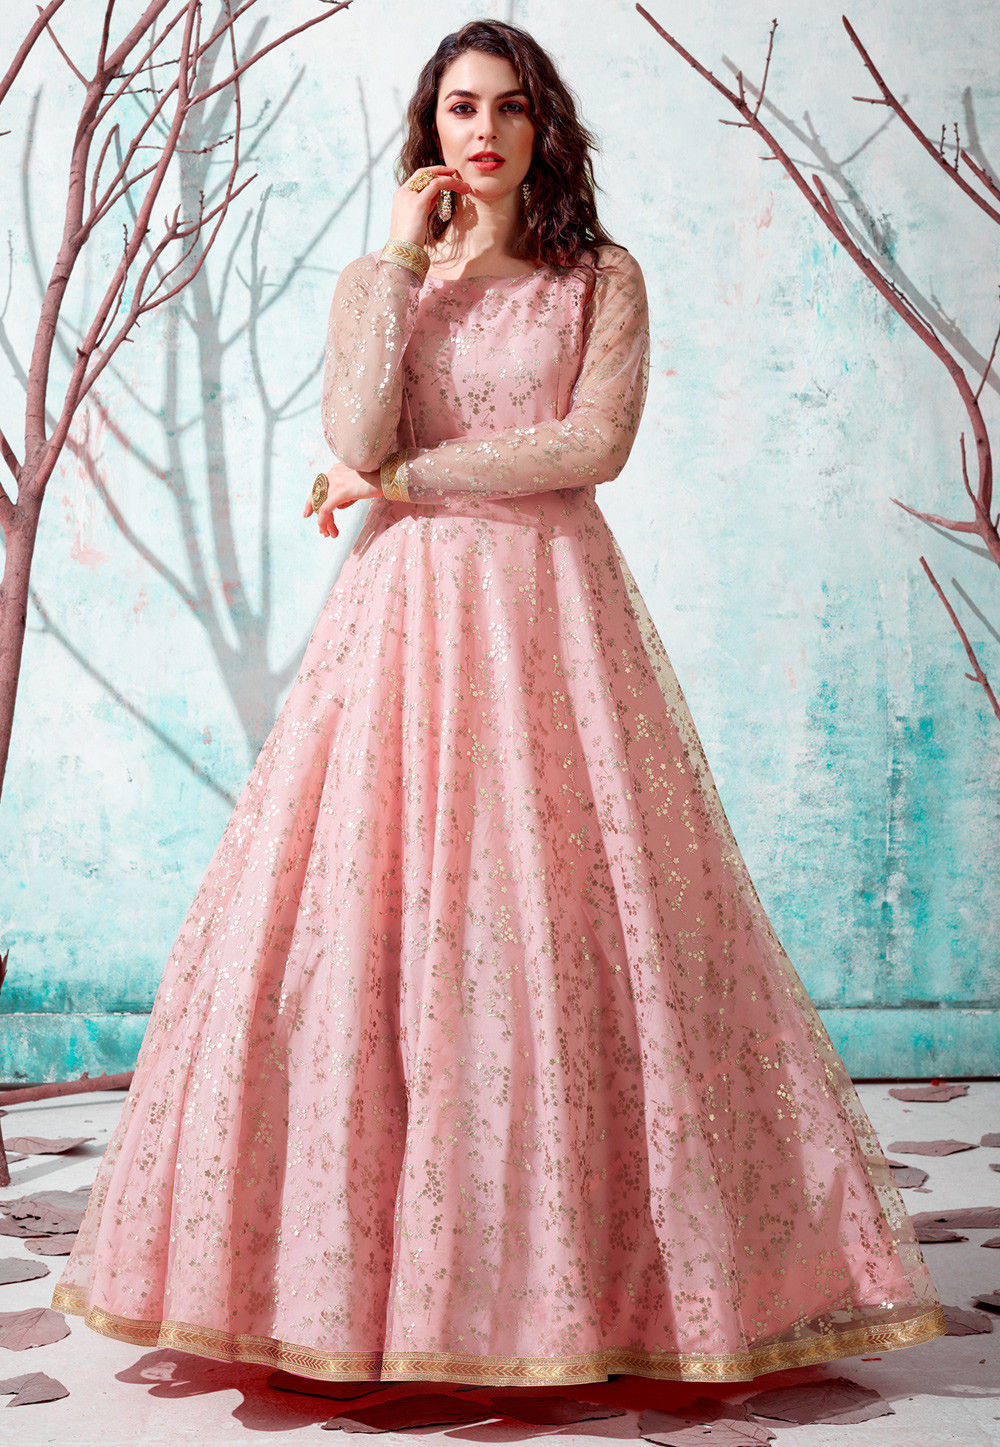 Aggregate more than 77 peach lace gown super hot